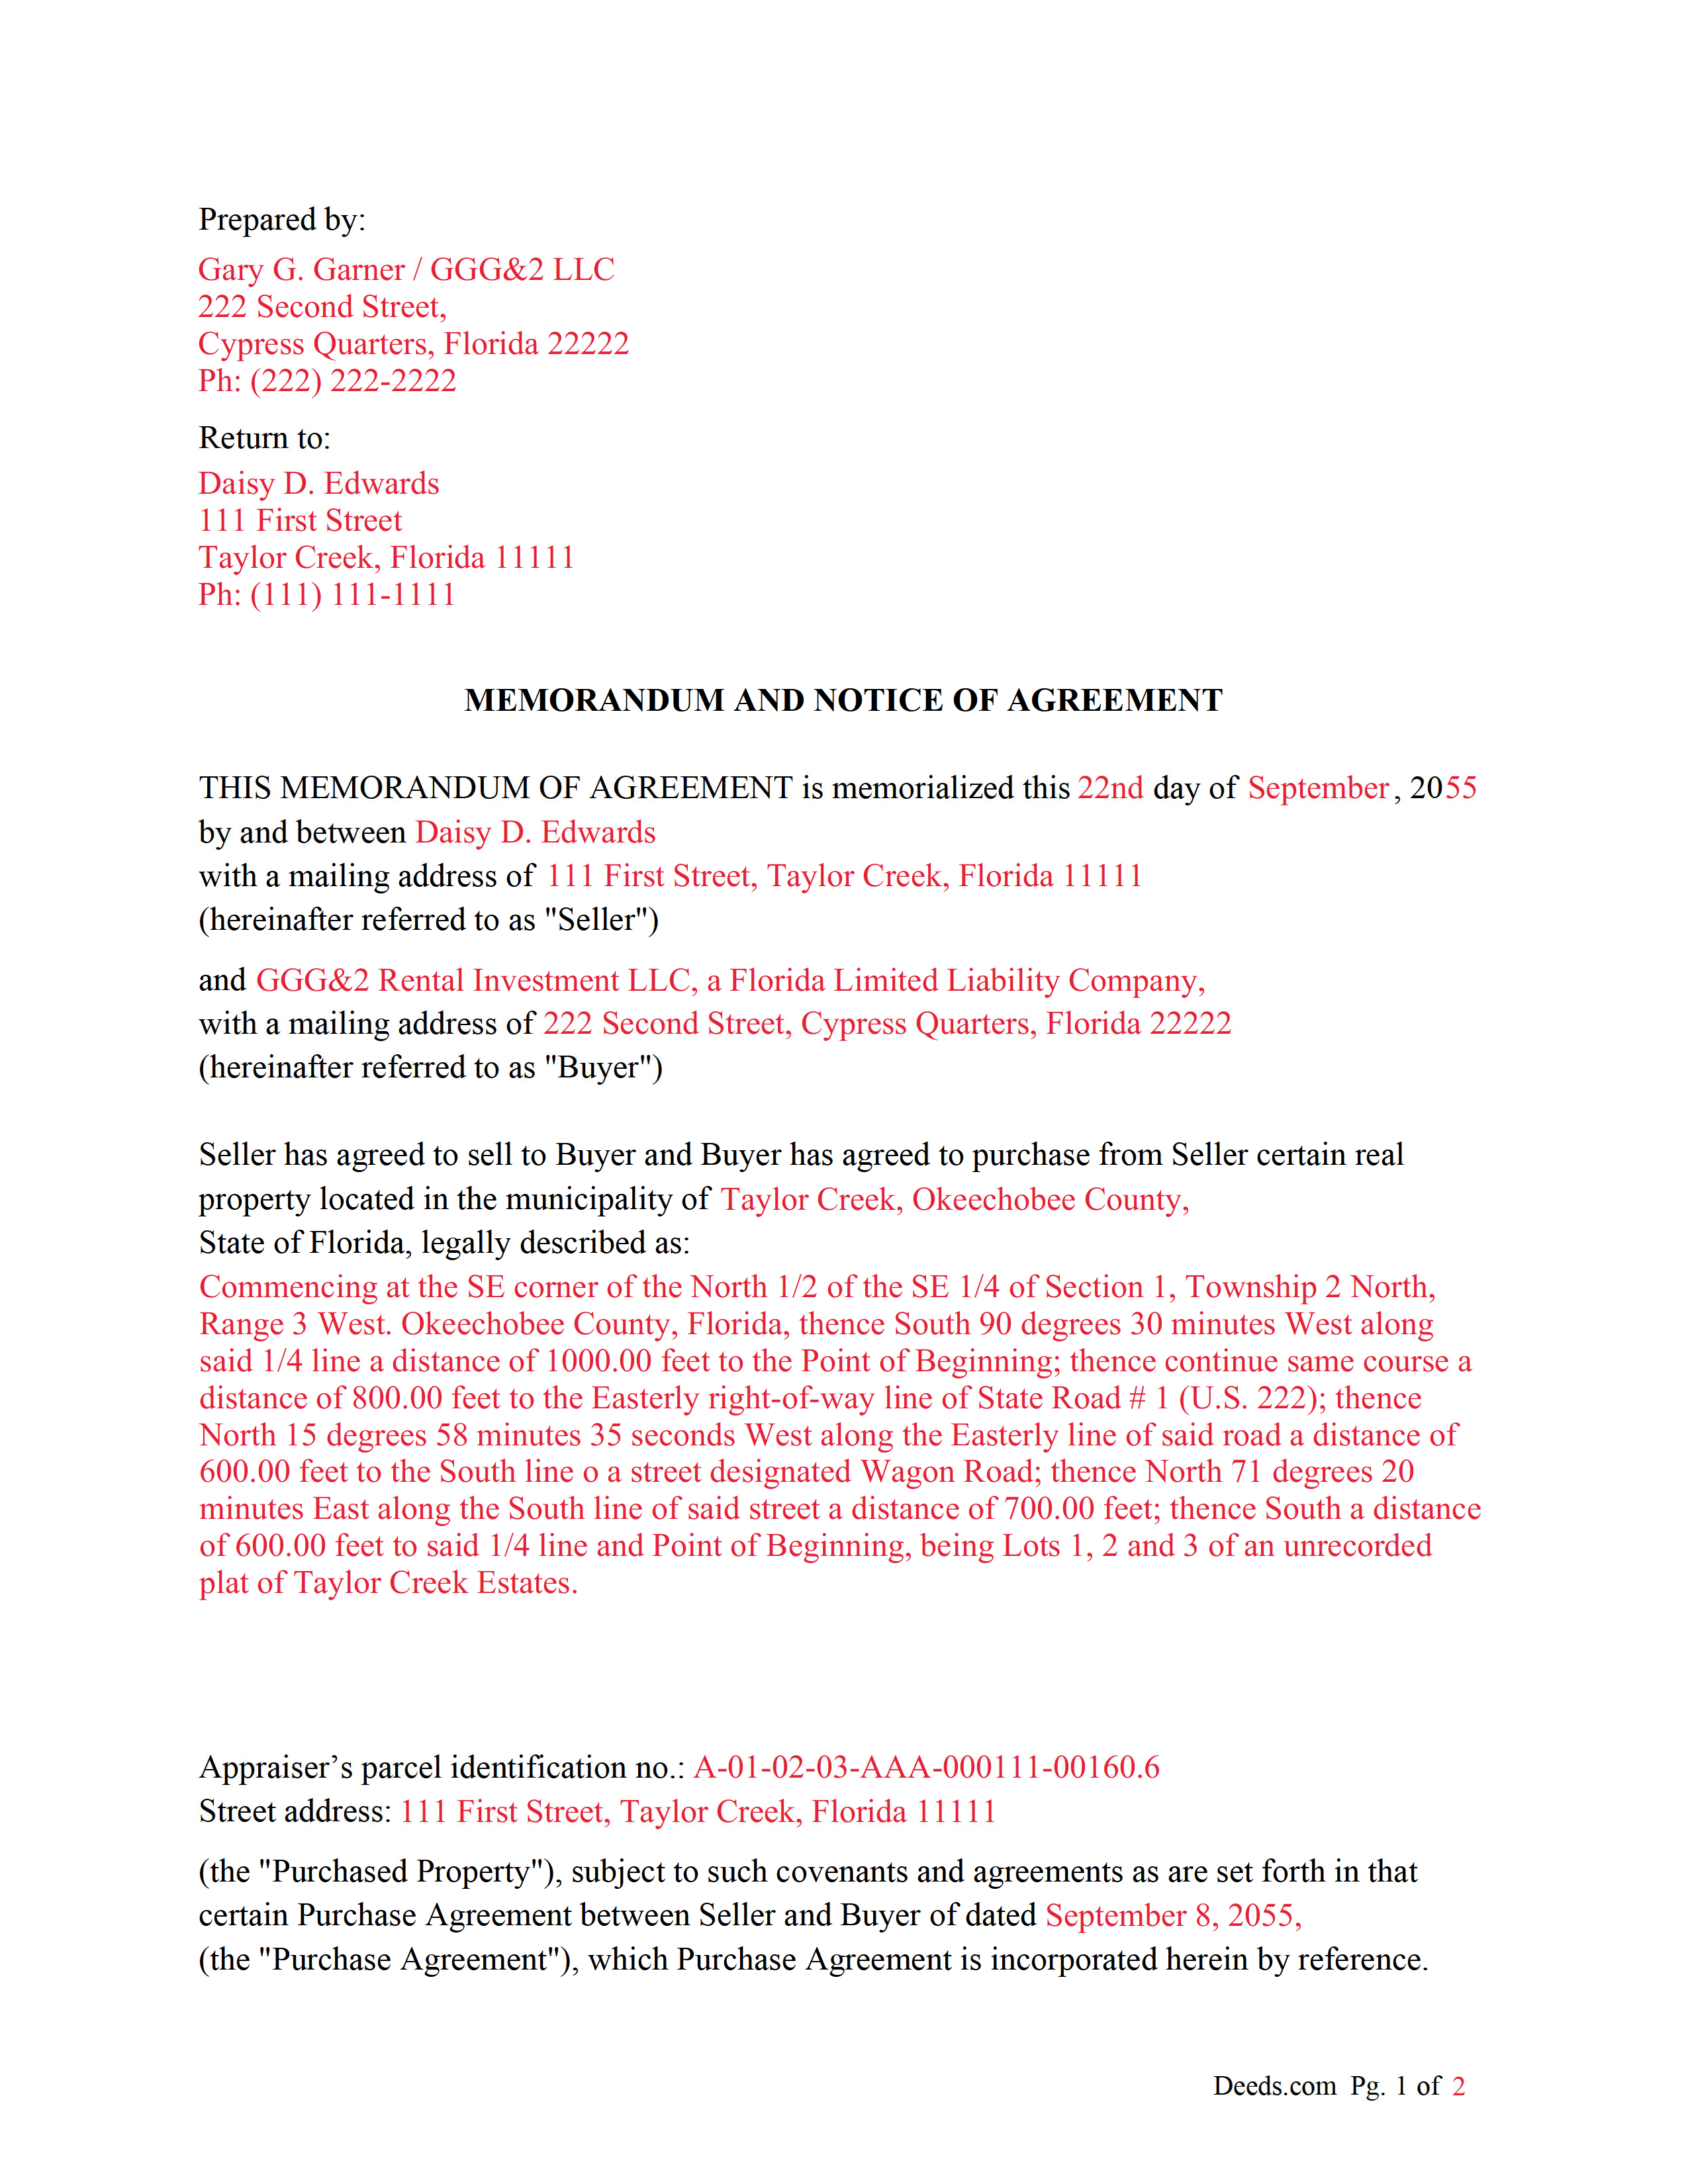 Completed Example of the Memorandum and Notice of Agreement Document